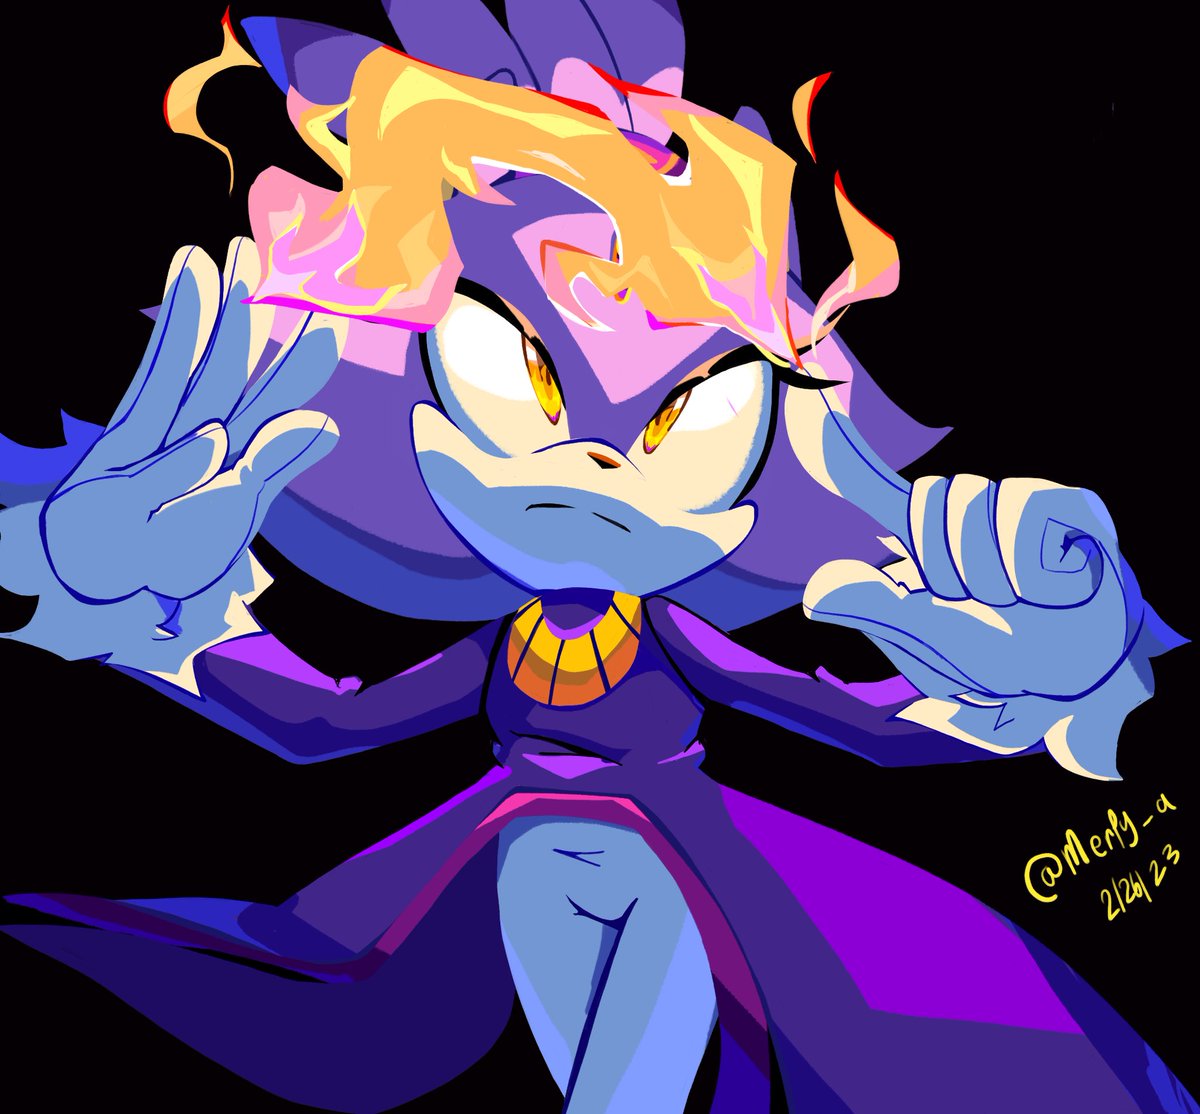 Another drawing of the one and only Blaze (god she’s awesome)
#BlazeTheCat #sonicfanart